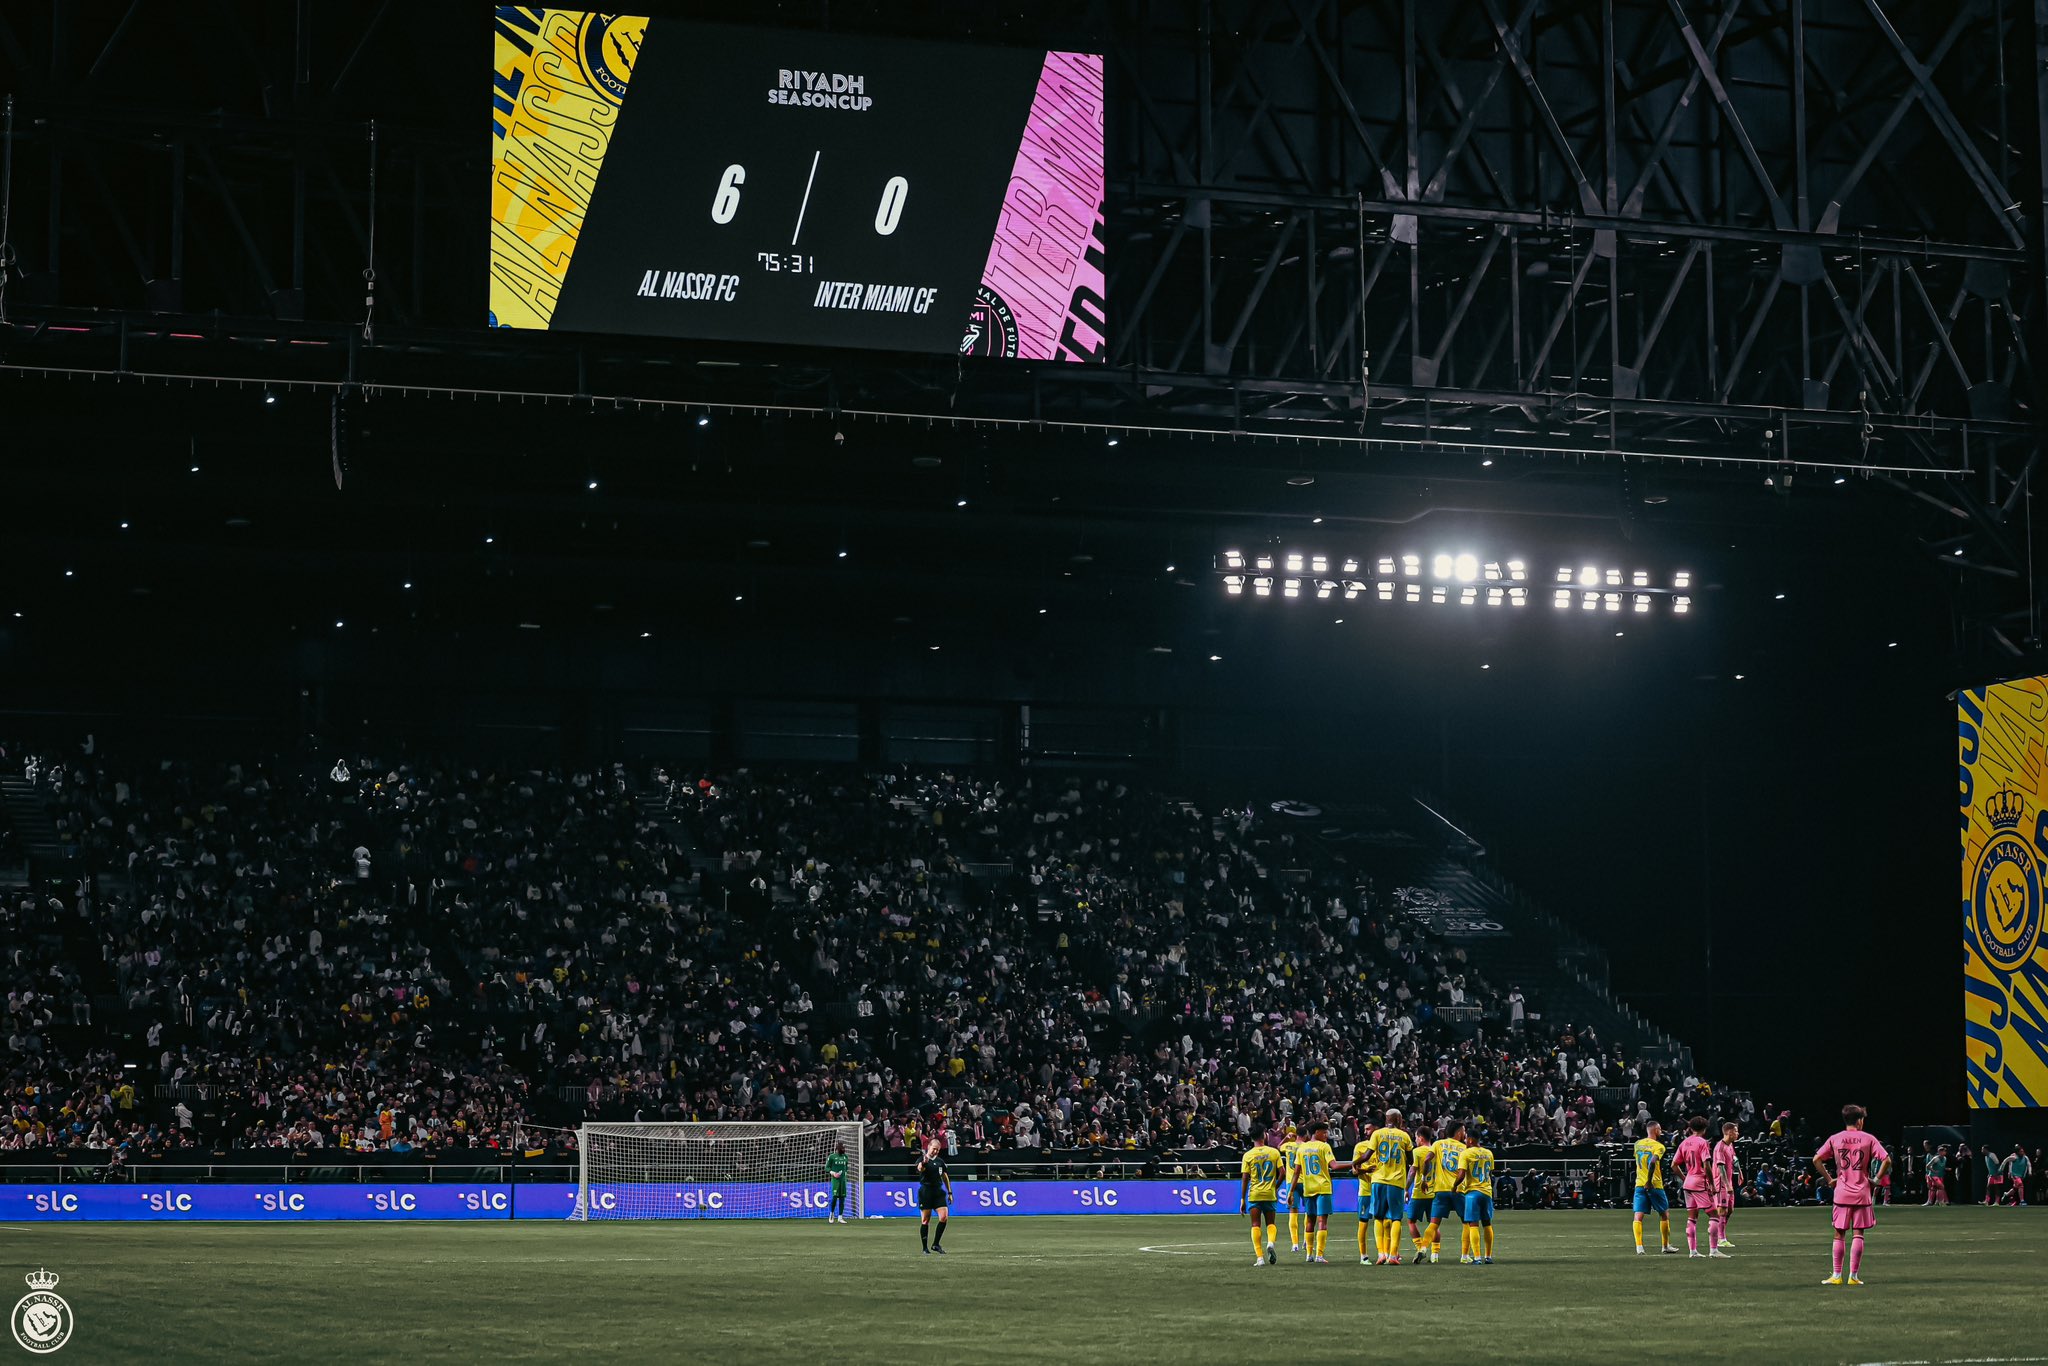 Al-Nassr's 6-0 victory over Inter Miami highlights the superiority of the  Saudi Pro League over MLS 